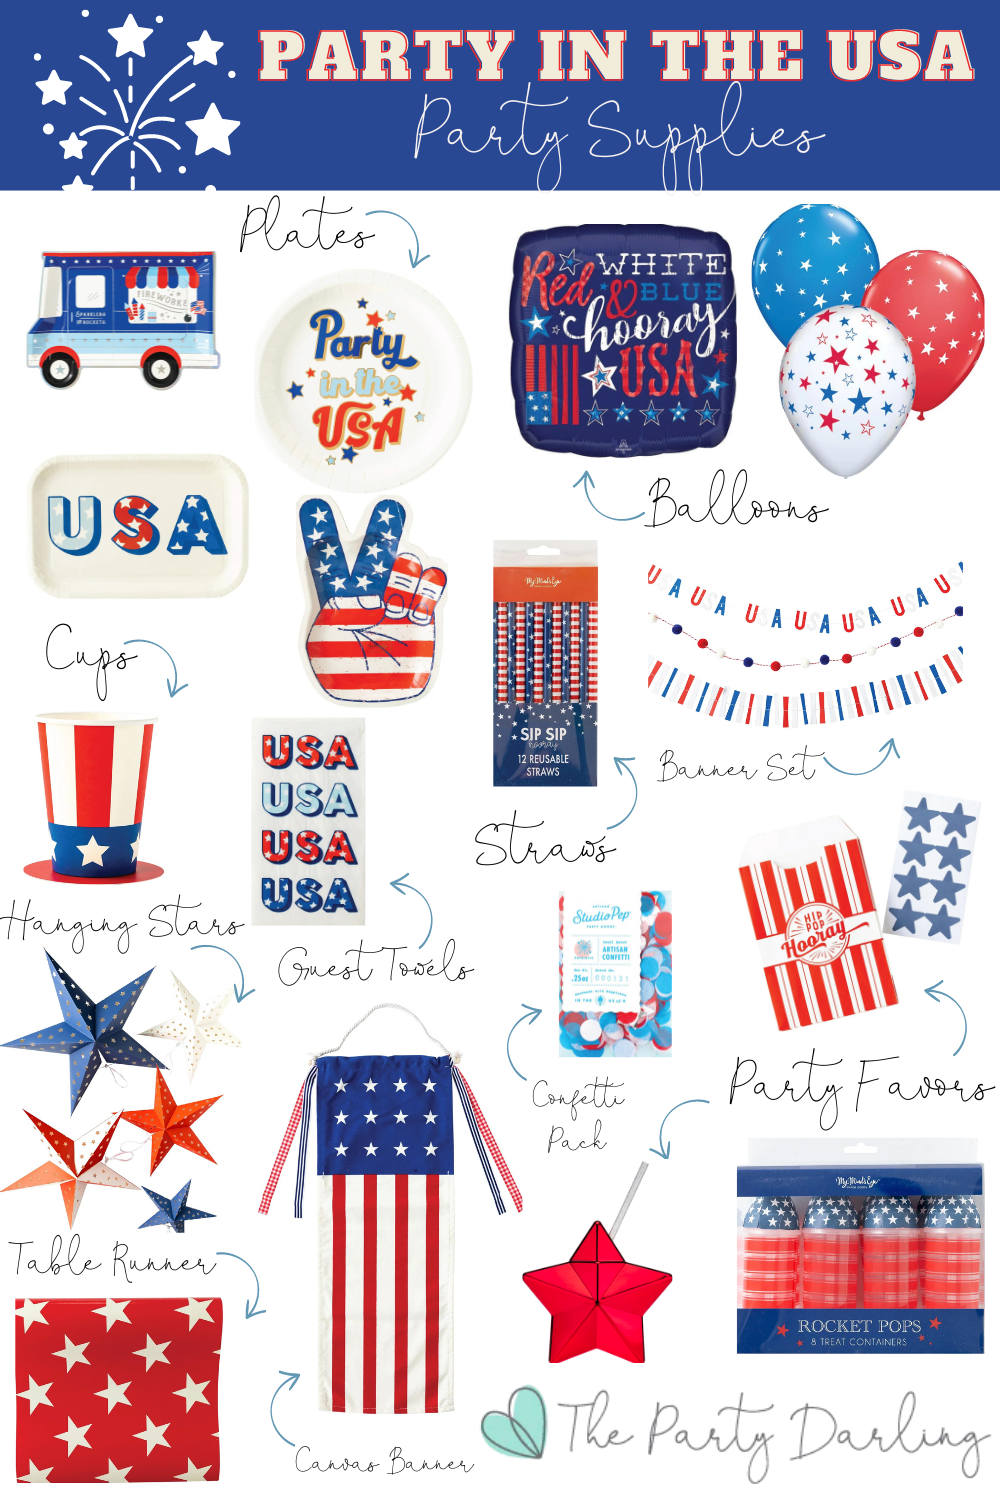 Party in the USA Summer Party Inspiration